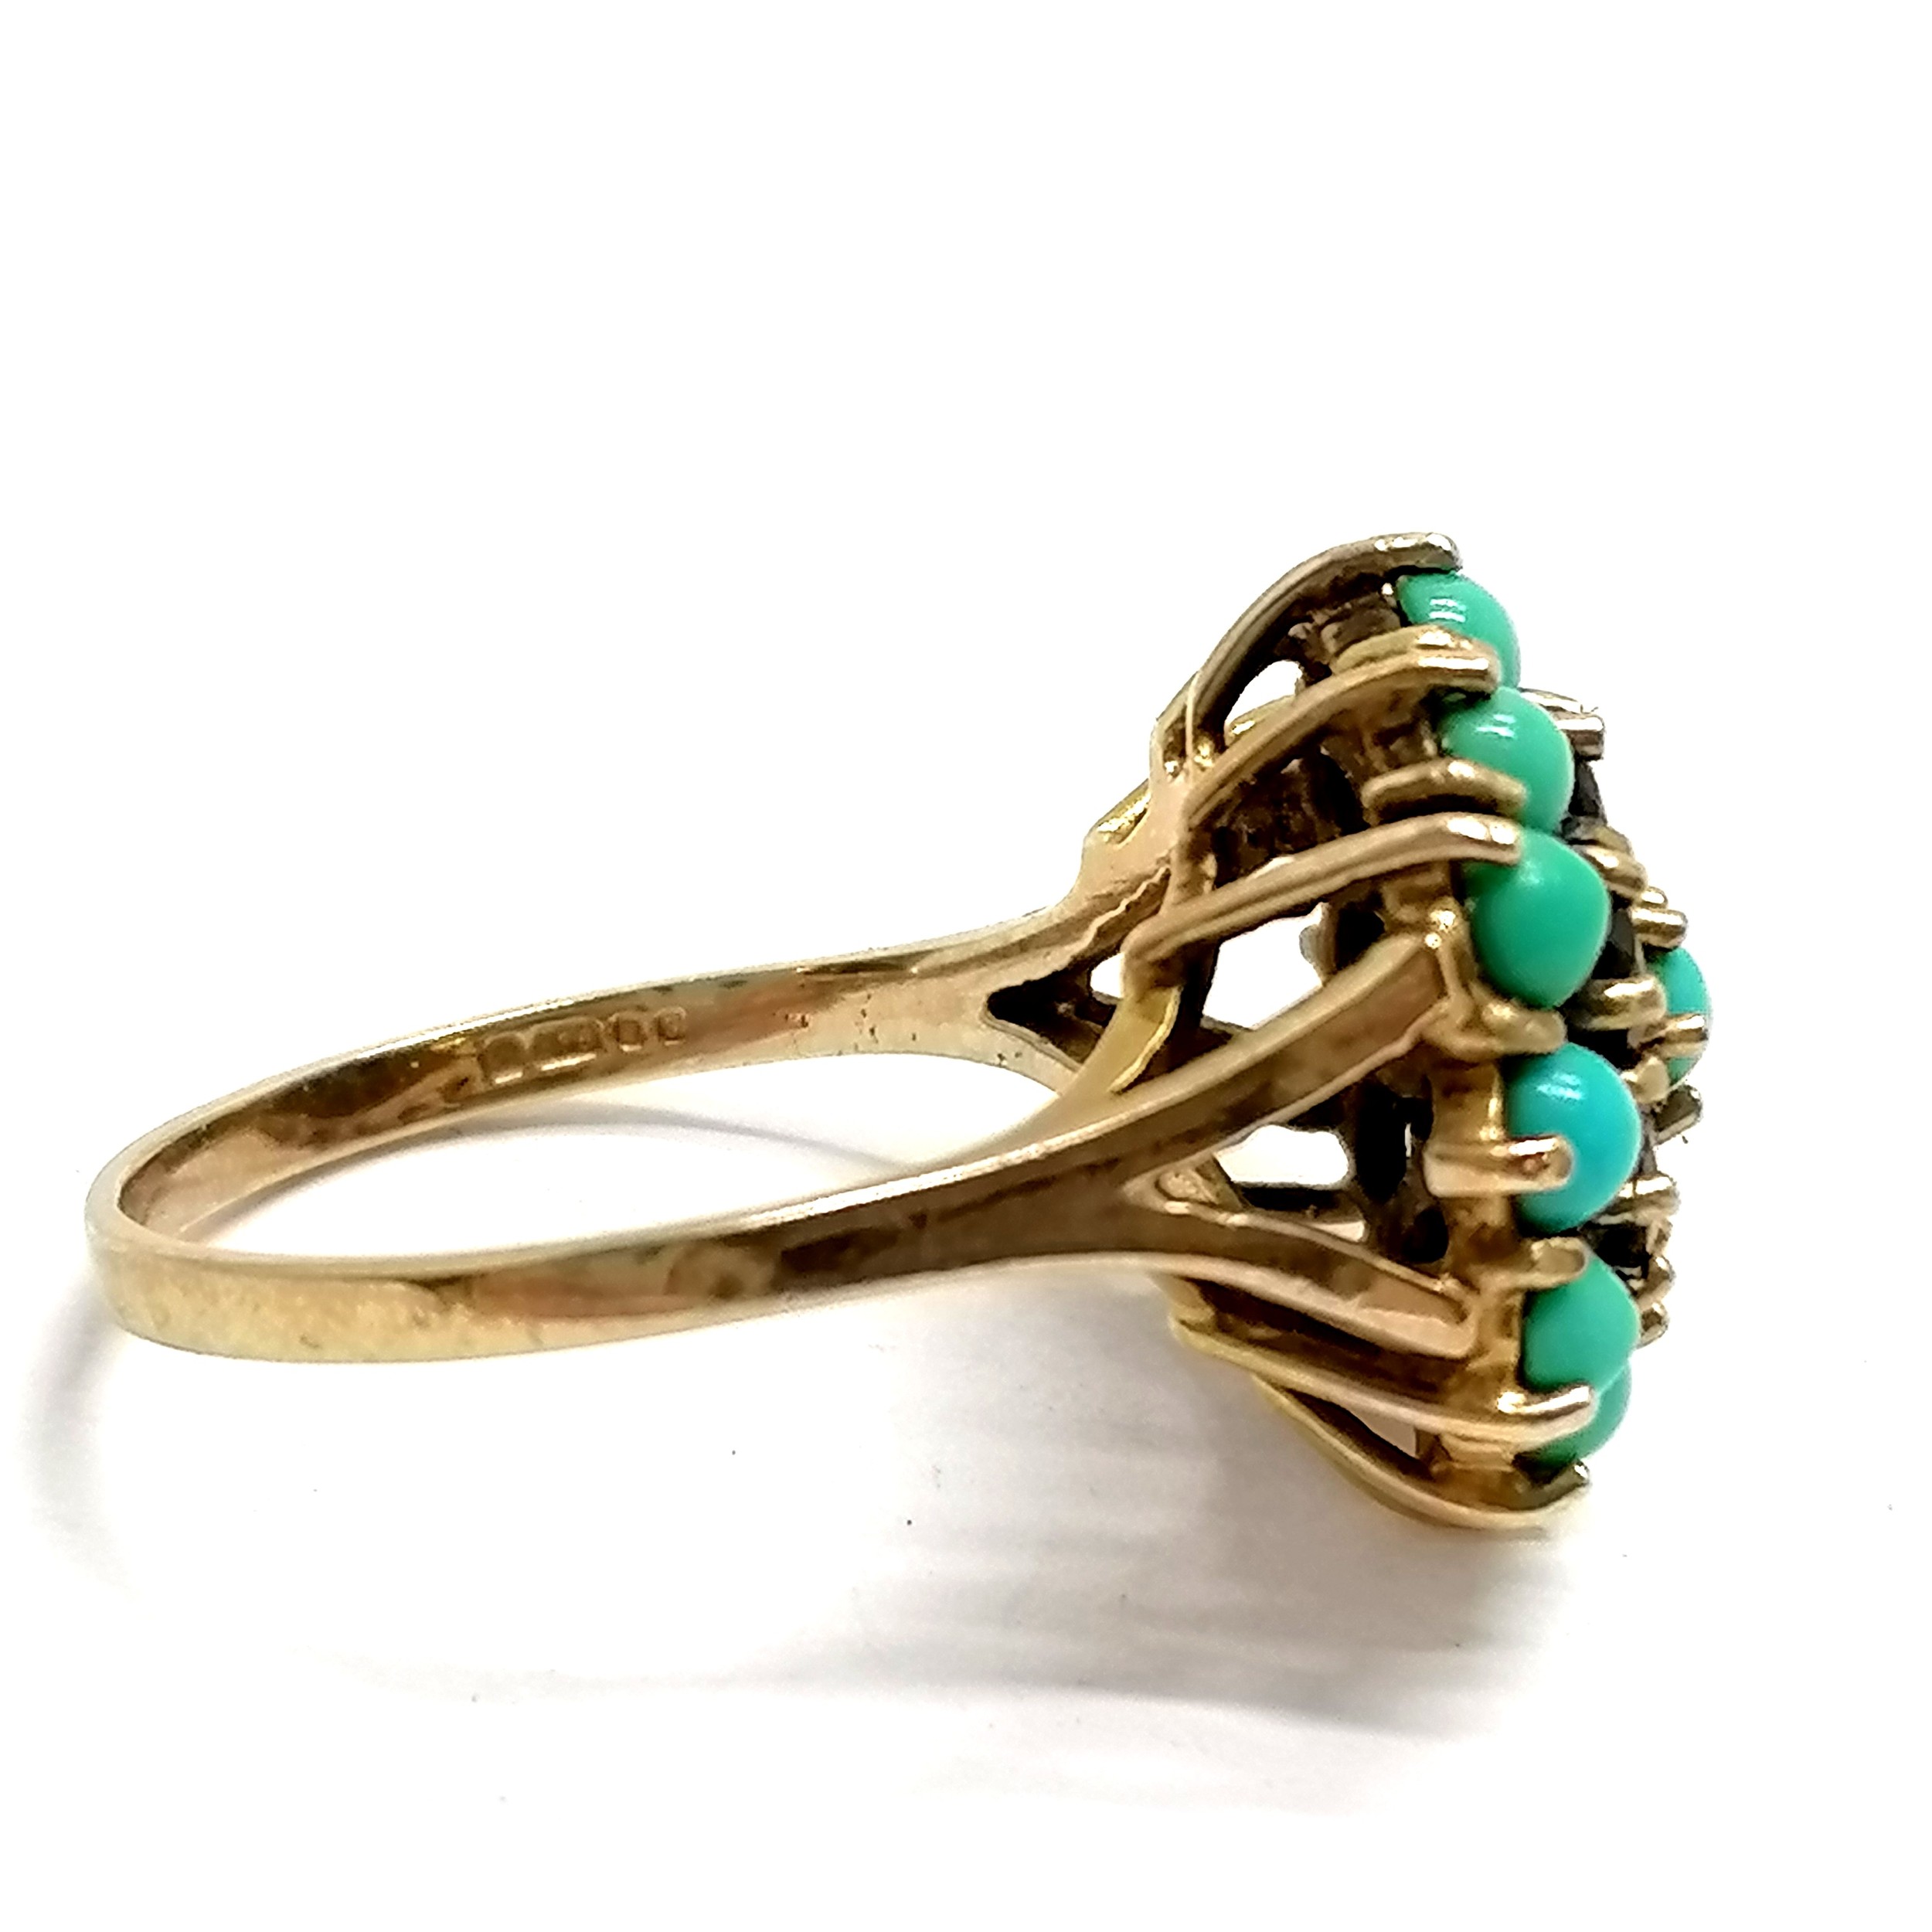 9ct hallmarked gold sapphire & turquoise cluster ring - size N½ & 3.8g total weight - Image 2 of 2